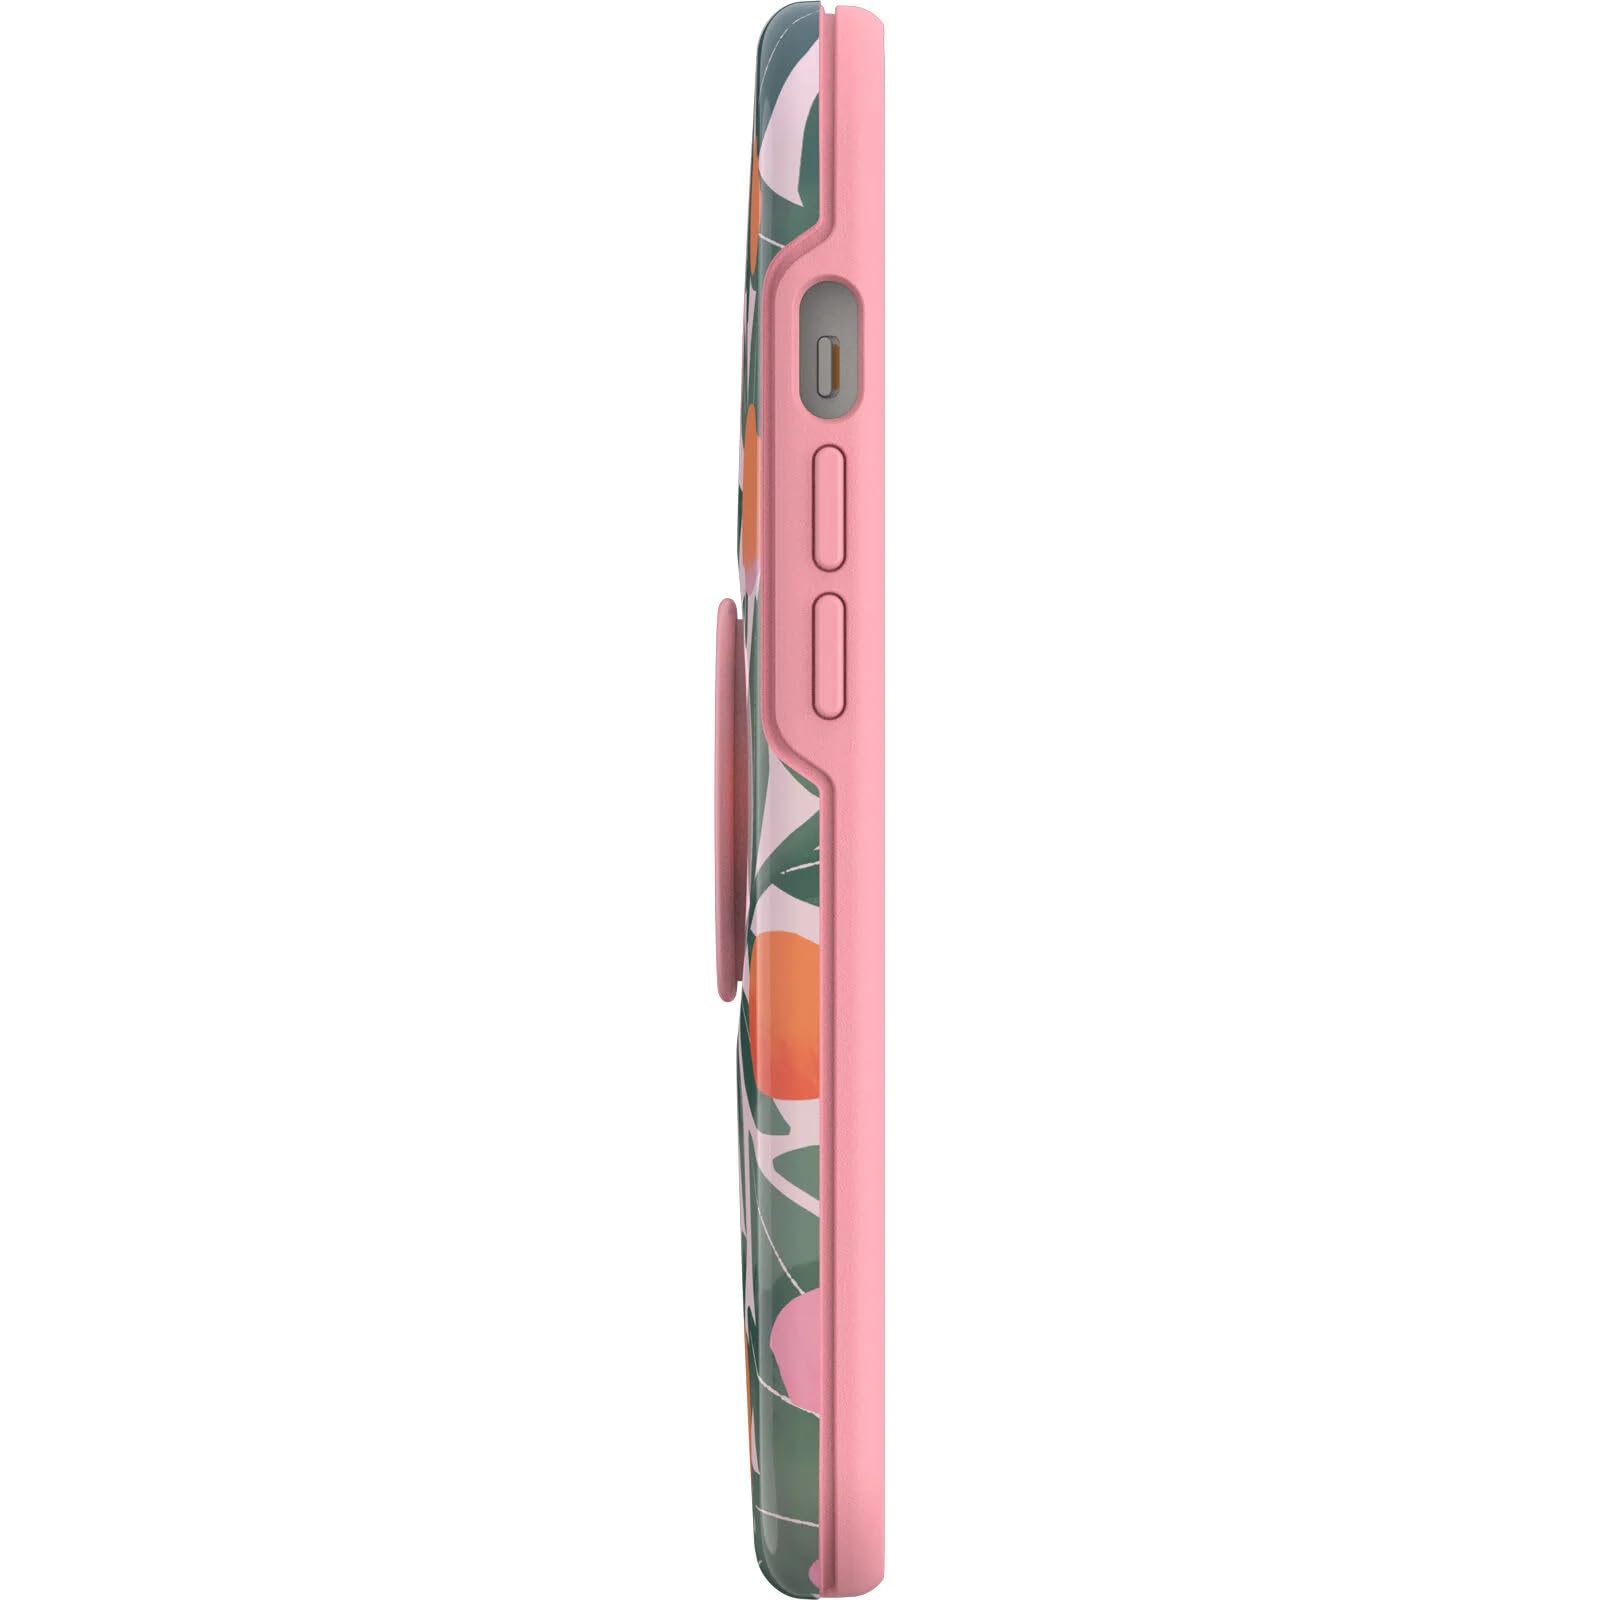 OtterBox + Pop Symmetry Series Case for iPhone 13 (Only) - Non-Retail Packaging - Stay Peachy (Pink Graphic)